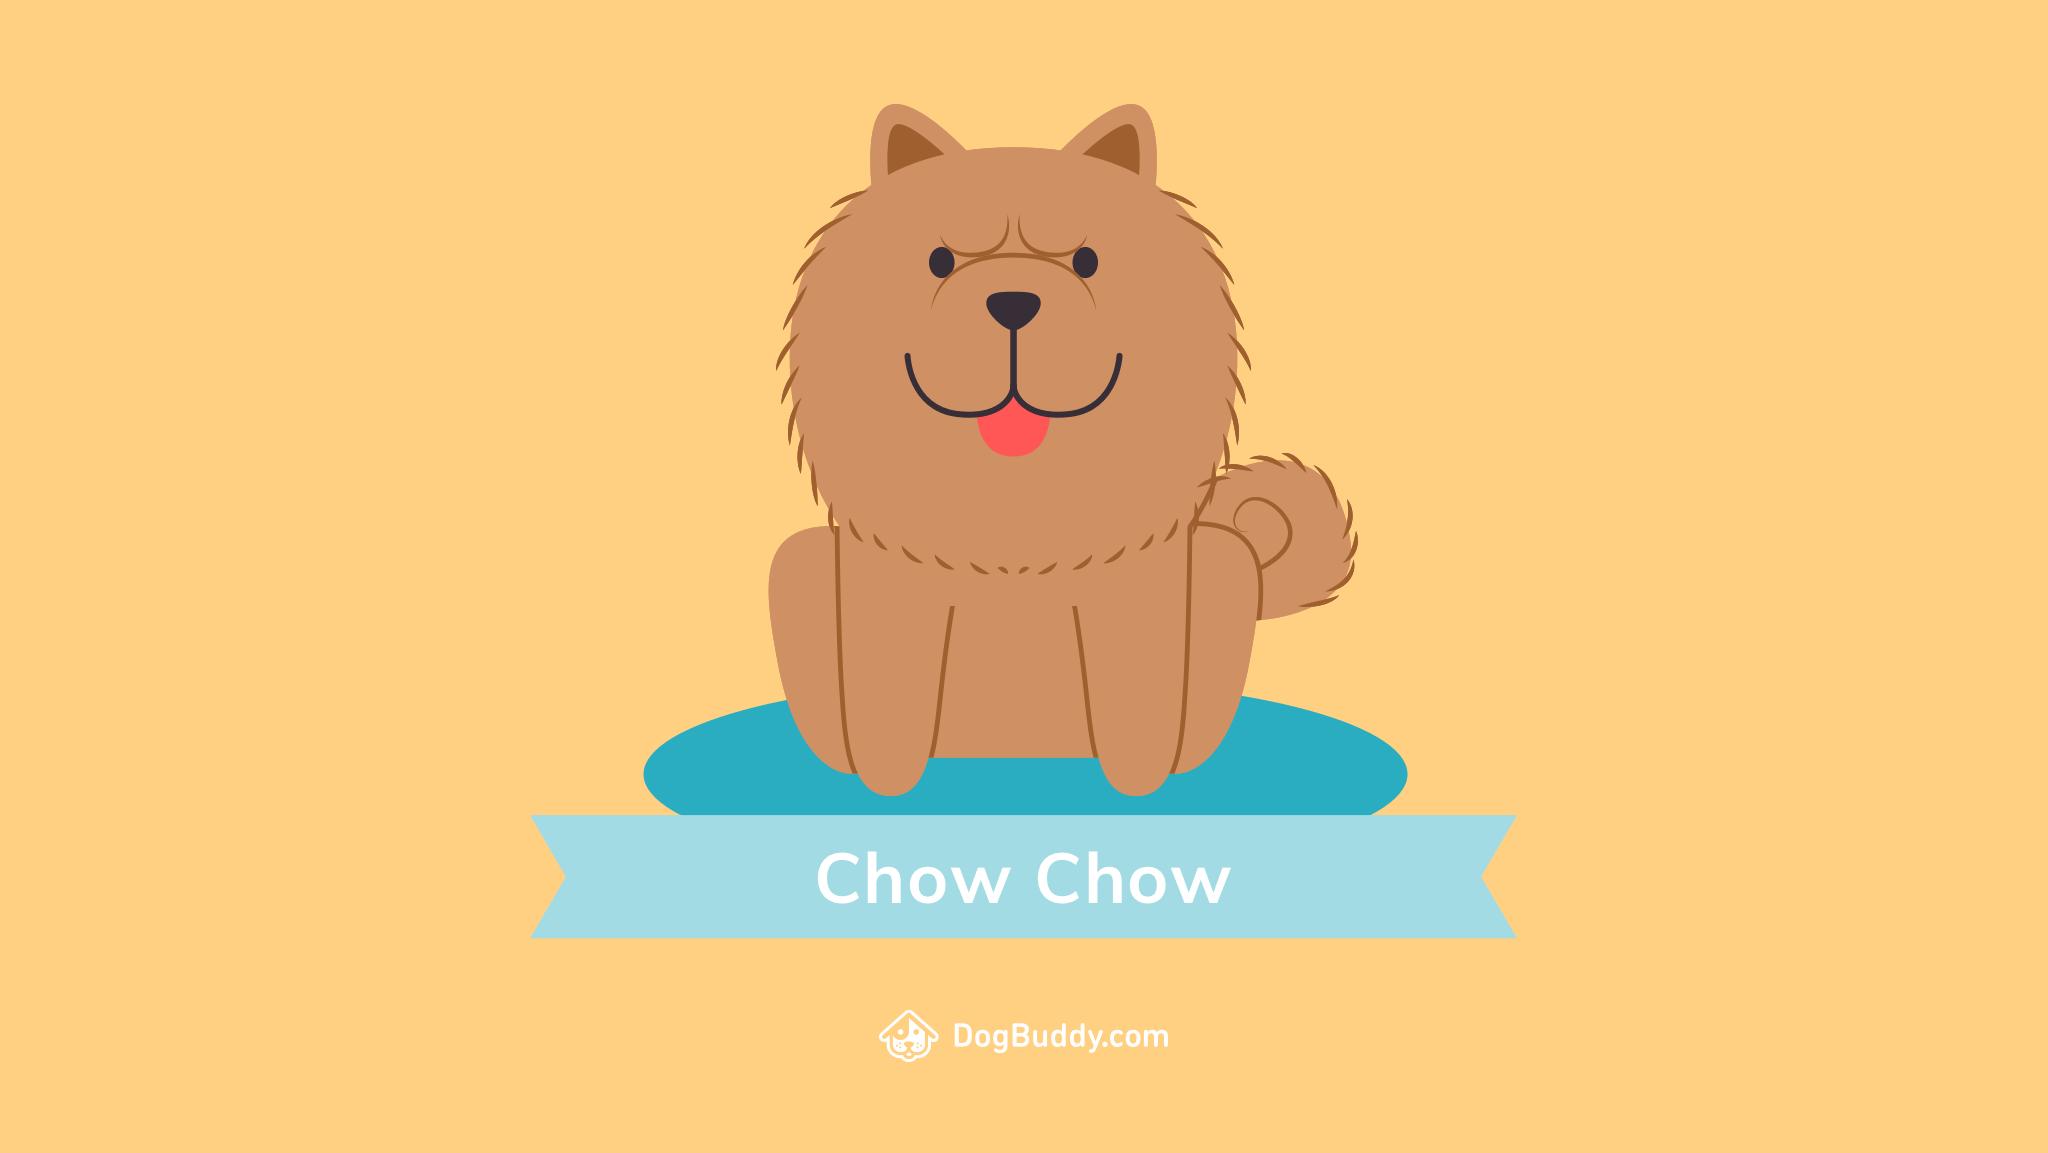 Chow Chow Wallpapers Hd For Pc, Chow Chow, Animal